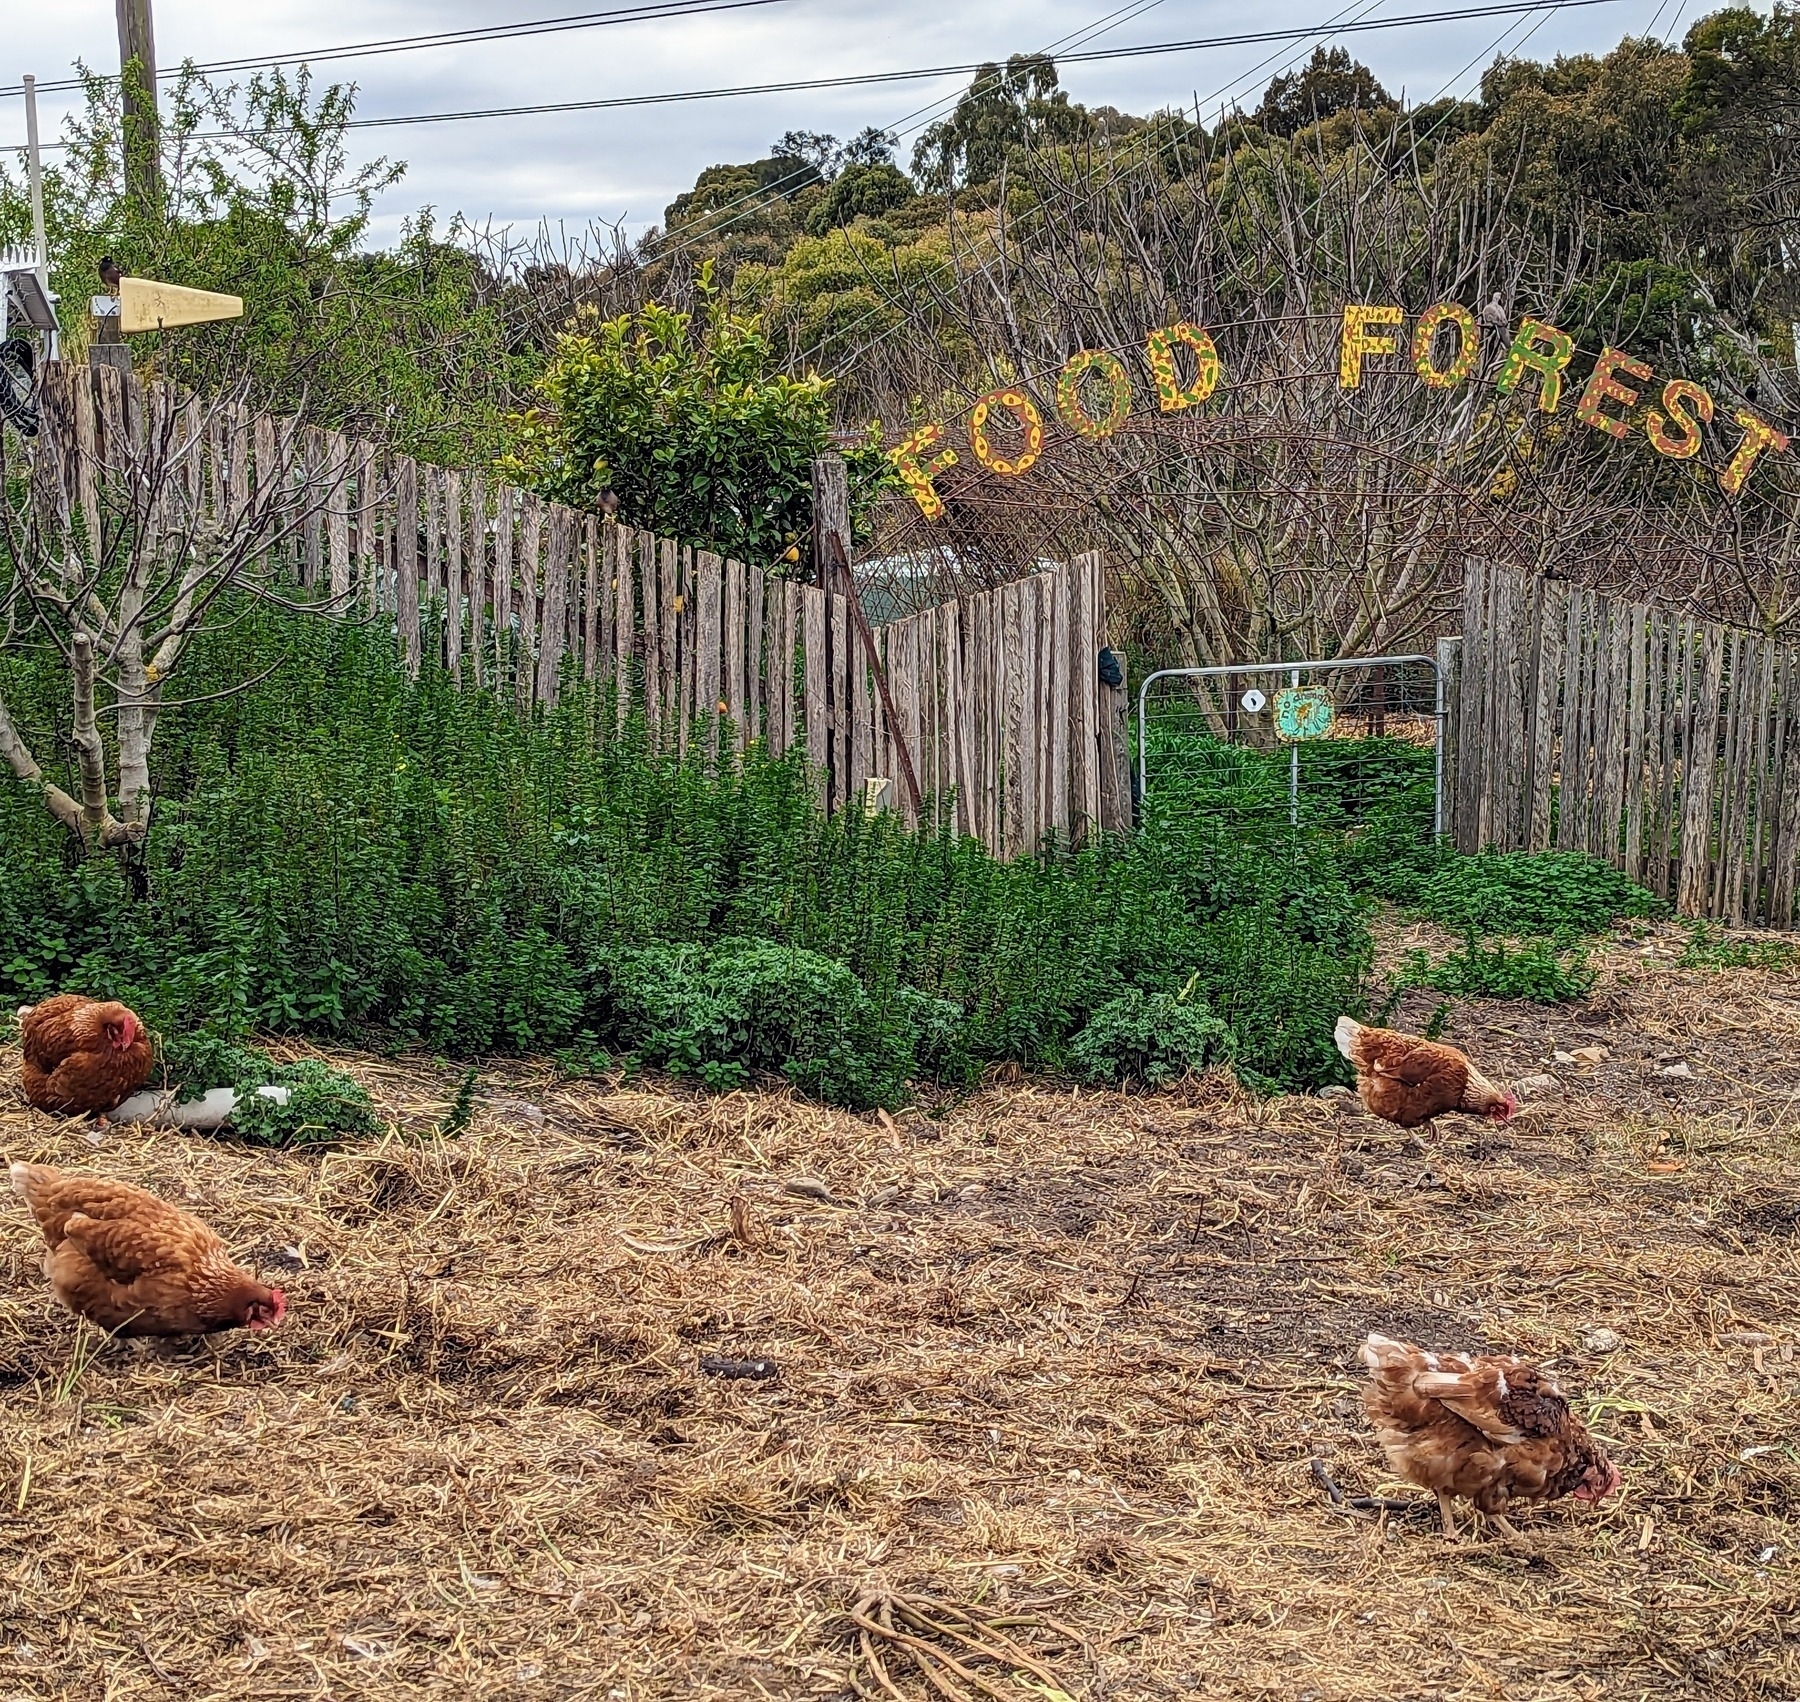 A paddock with chickens foraging. A sign above the fence reads: Food Forest.